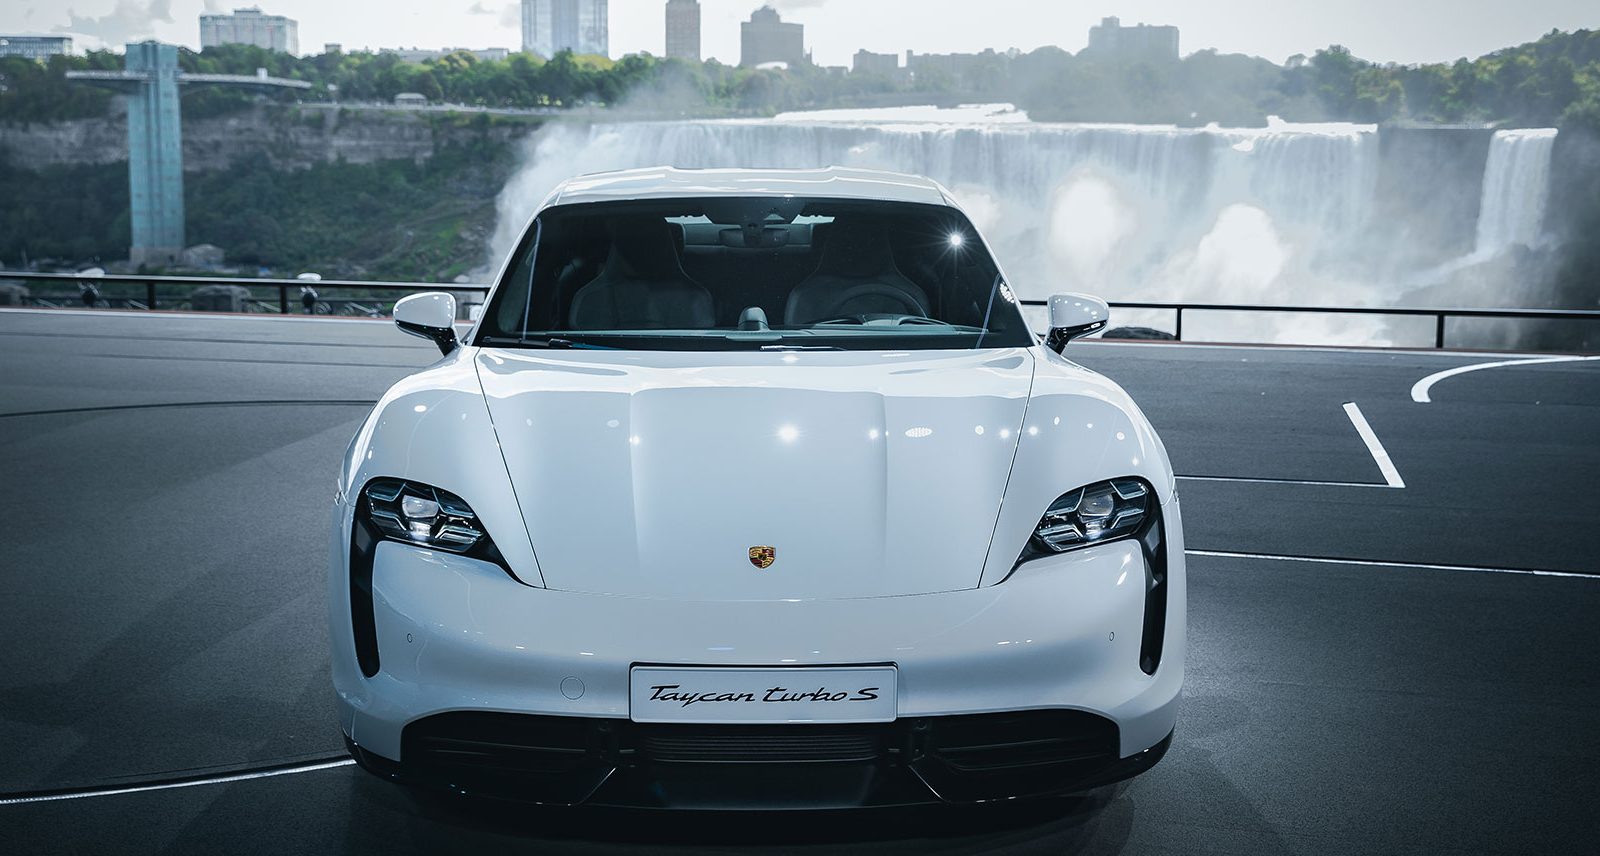 Porsche’s All-Electric Taycan Upstages Even Niagara Falls